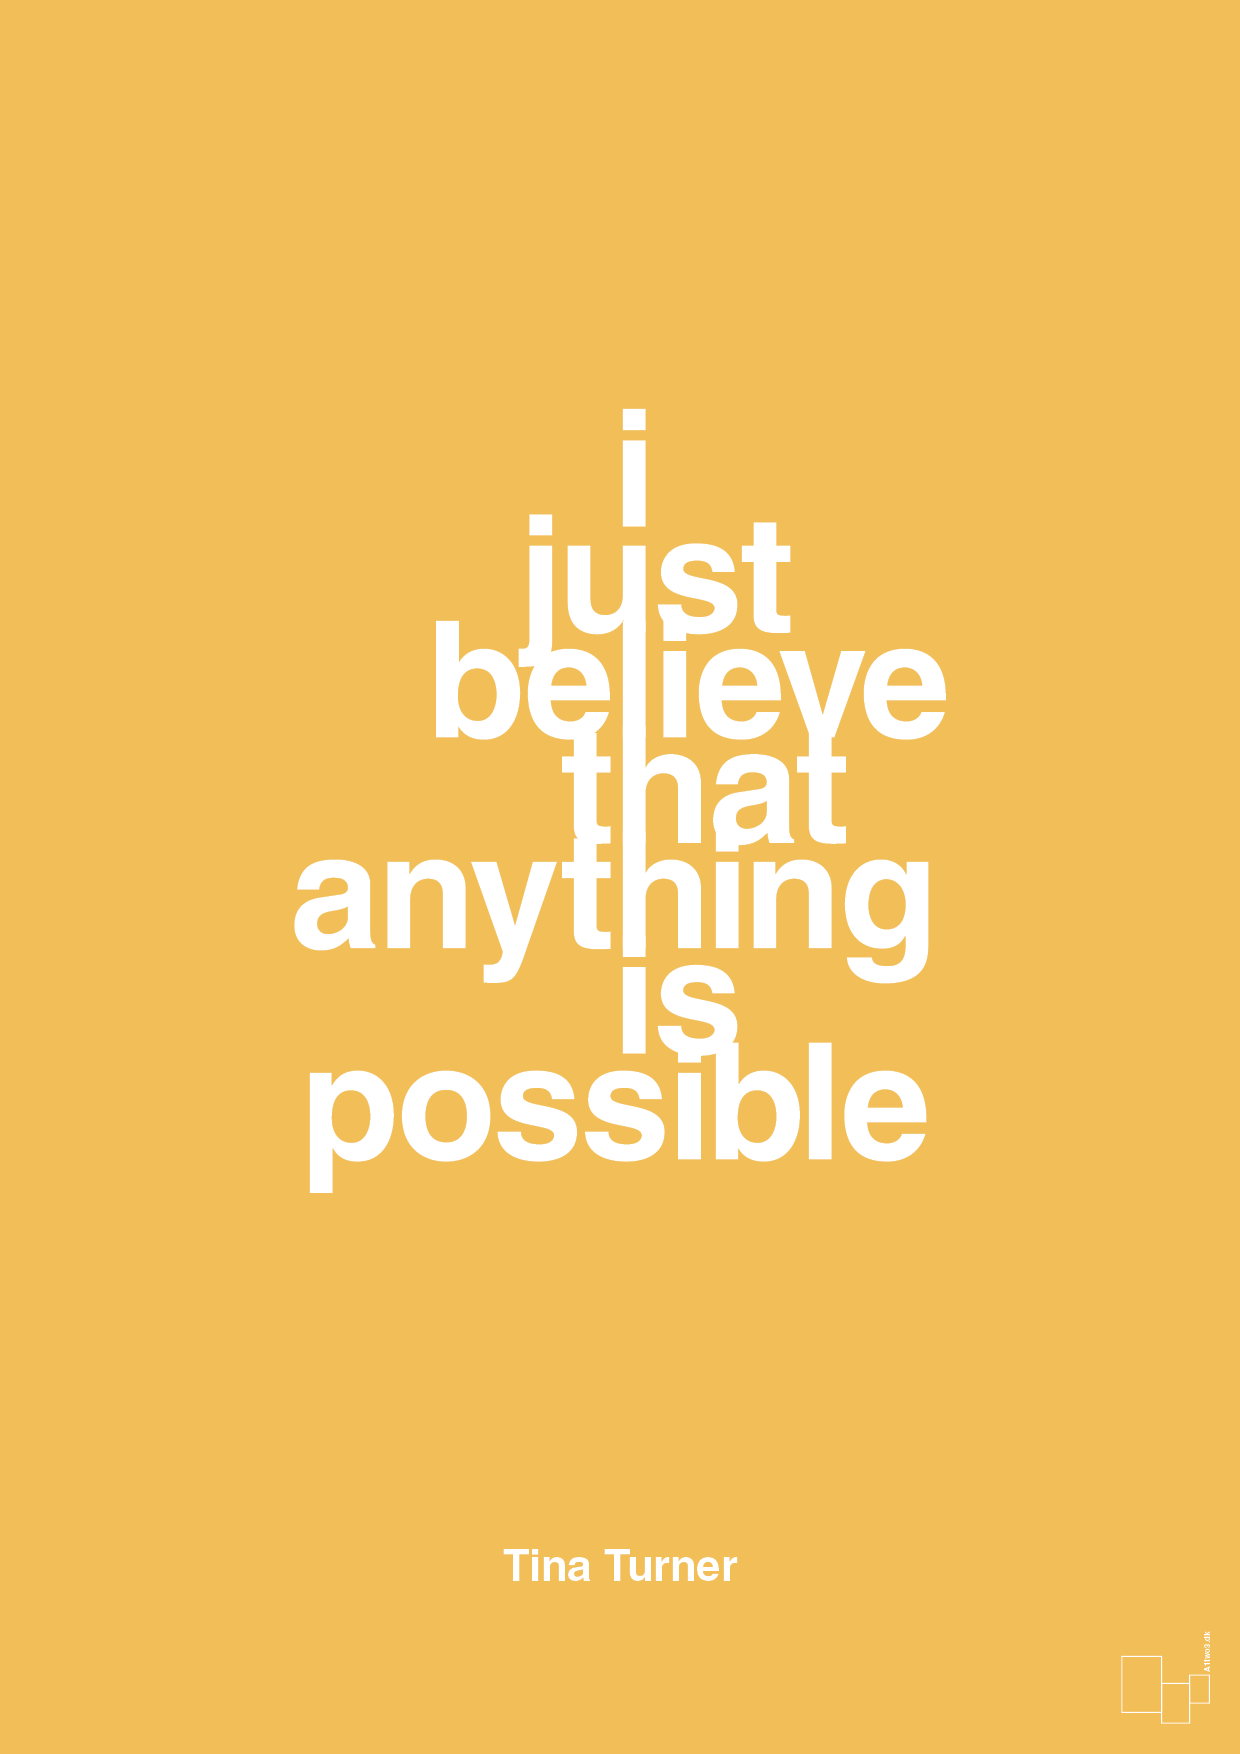 i just believe that anything is possible - Plakat med Citater i Honeycomb